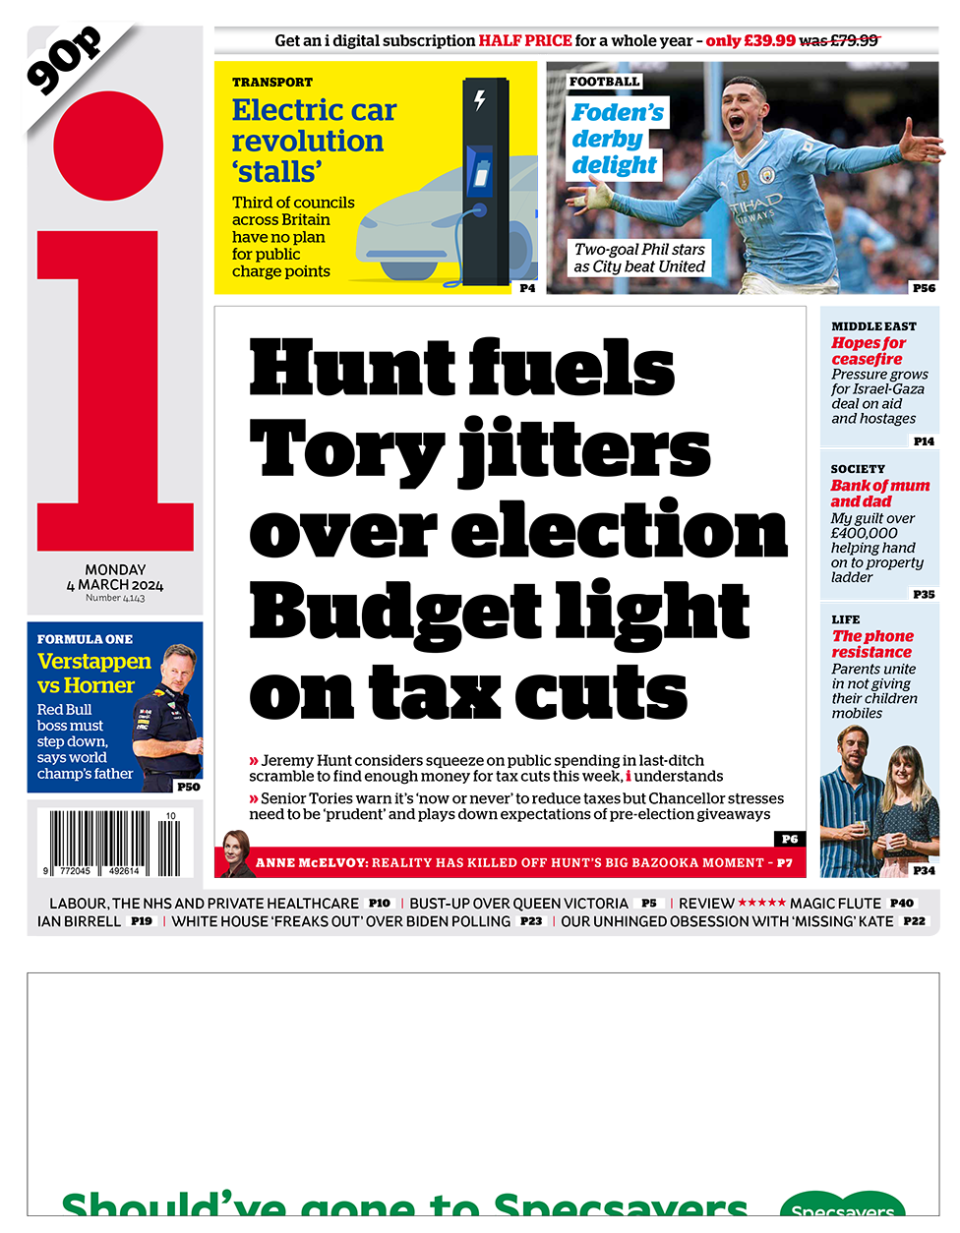 The headline in the i reads: "Hunt fuels Tory jitters over election Budget light on tax cuts".